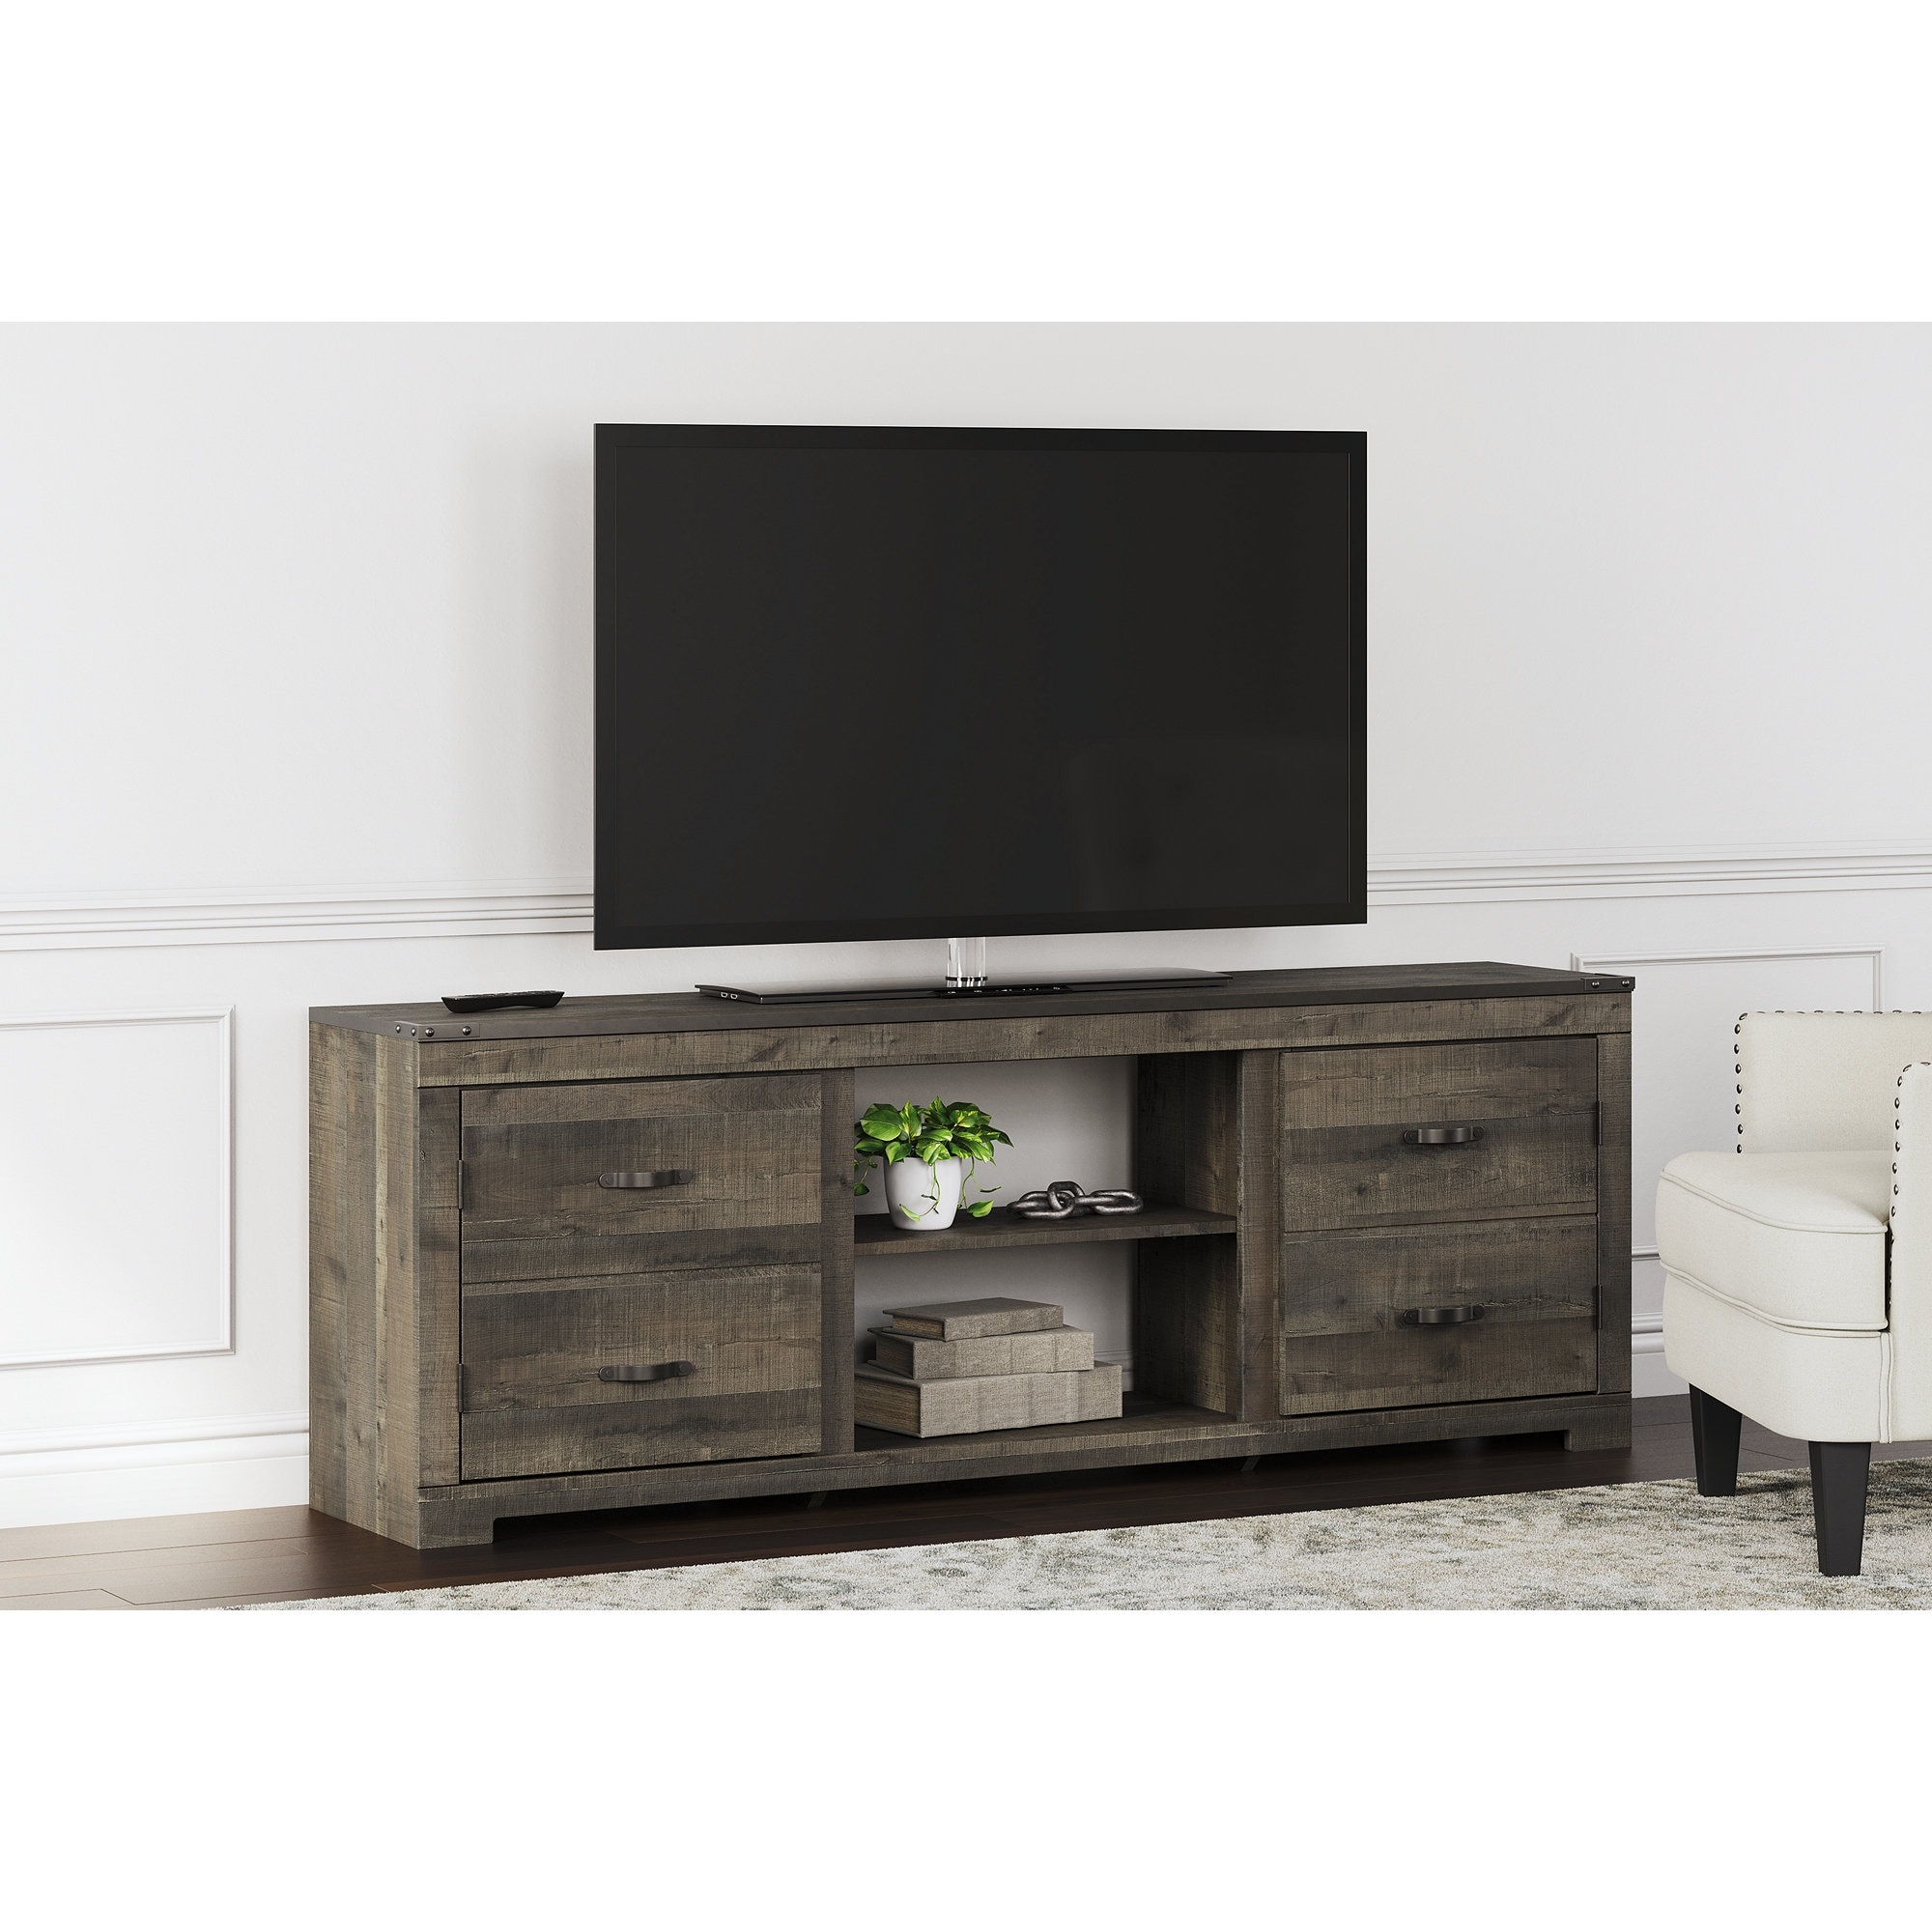 Signature Design by Ashley Trinell Brown Large TV Stand for TVs up to 82 inch with Fireplace Option - 72 inches in width